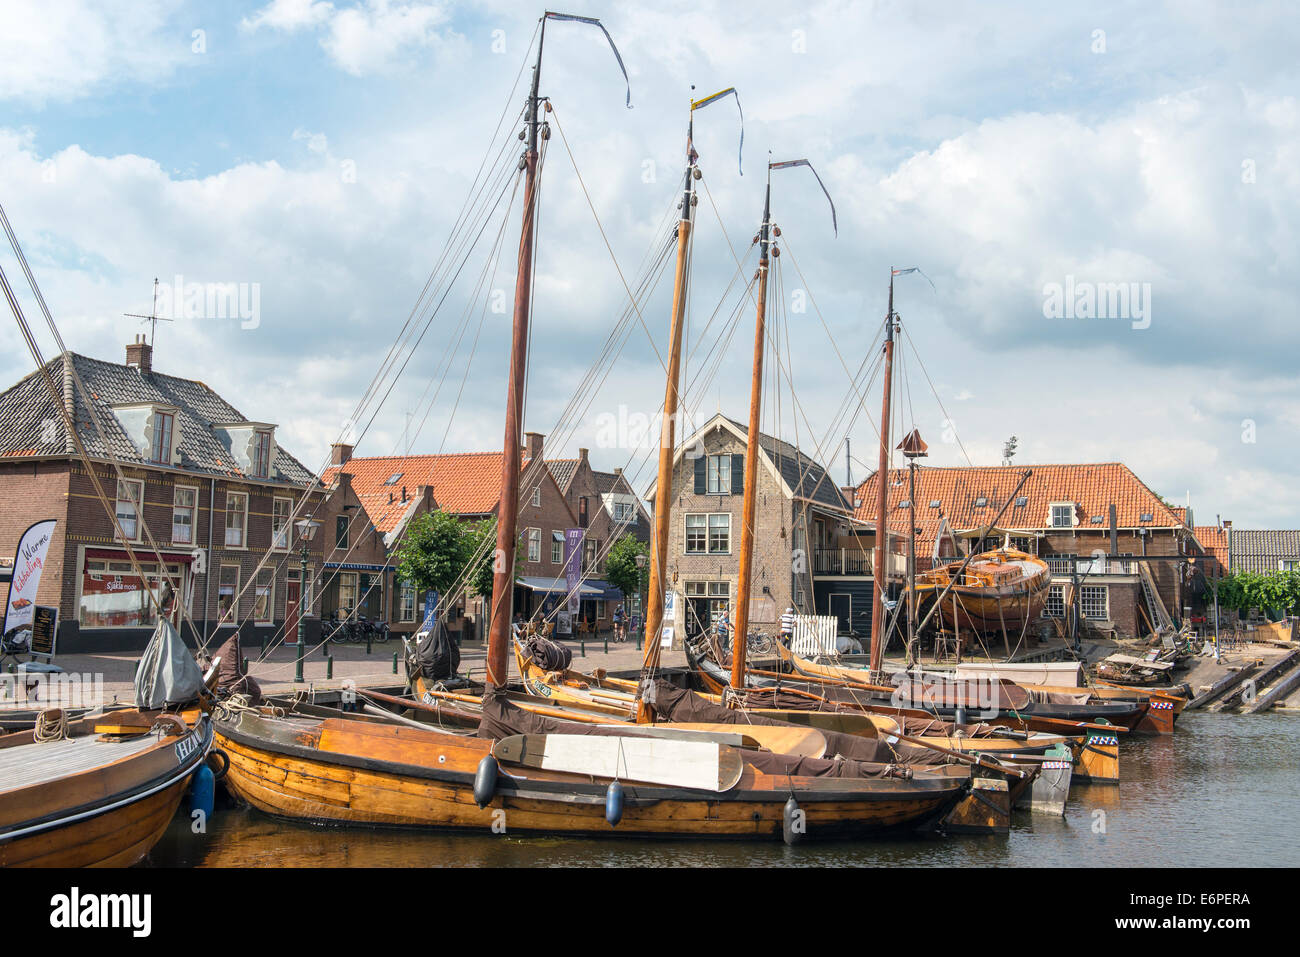 Botters, a type of historical fishing boat, dockyard in the background, Bunschoten-.Spakenburg, Netherlands Stock Photo